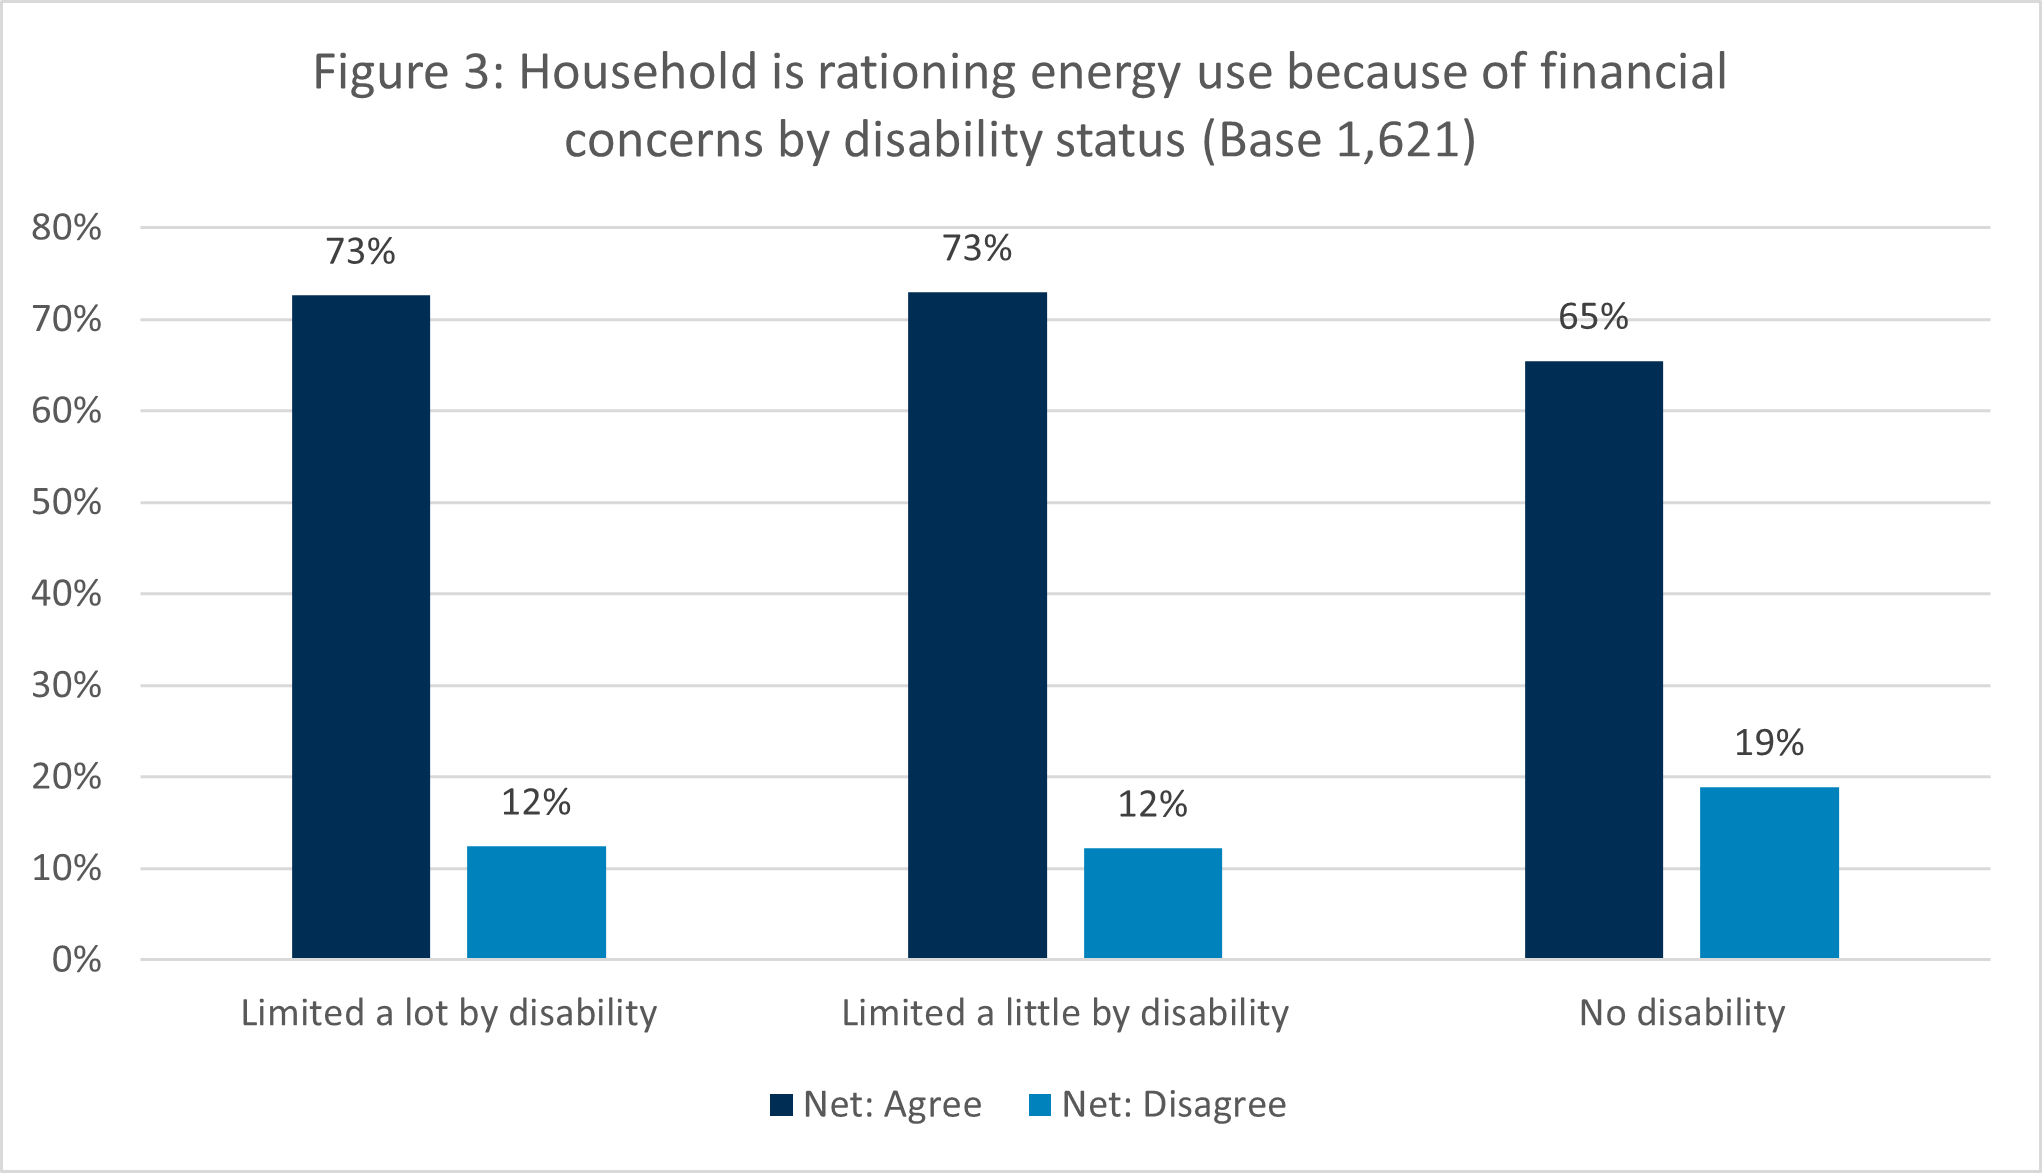 Disabled people are more likely to ration their energy use due to financial concerns with 12% of those limited a little and those limited a lot disagreed they were rationing their energy use compared with 19% of non-disabled people